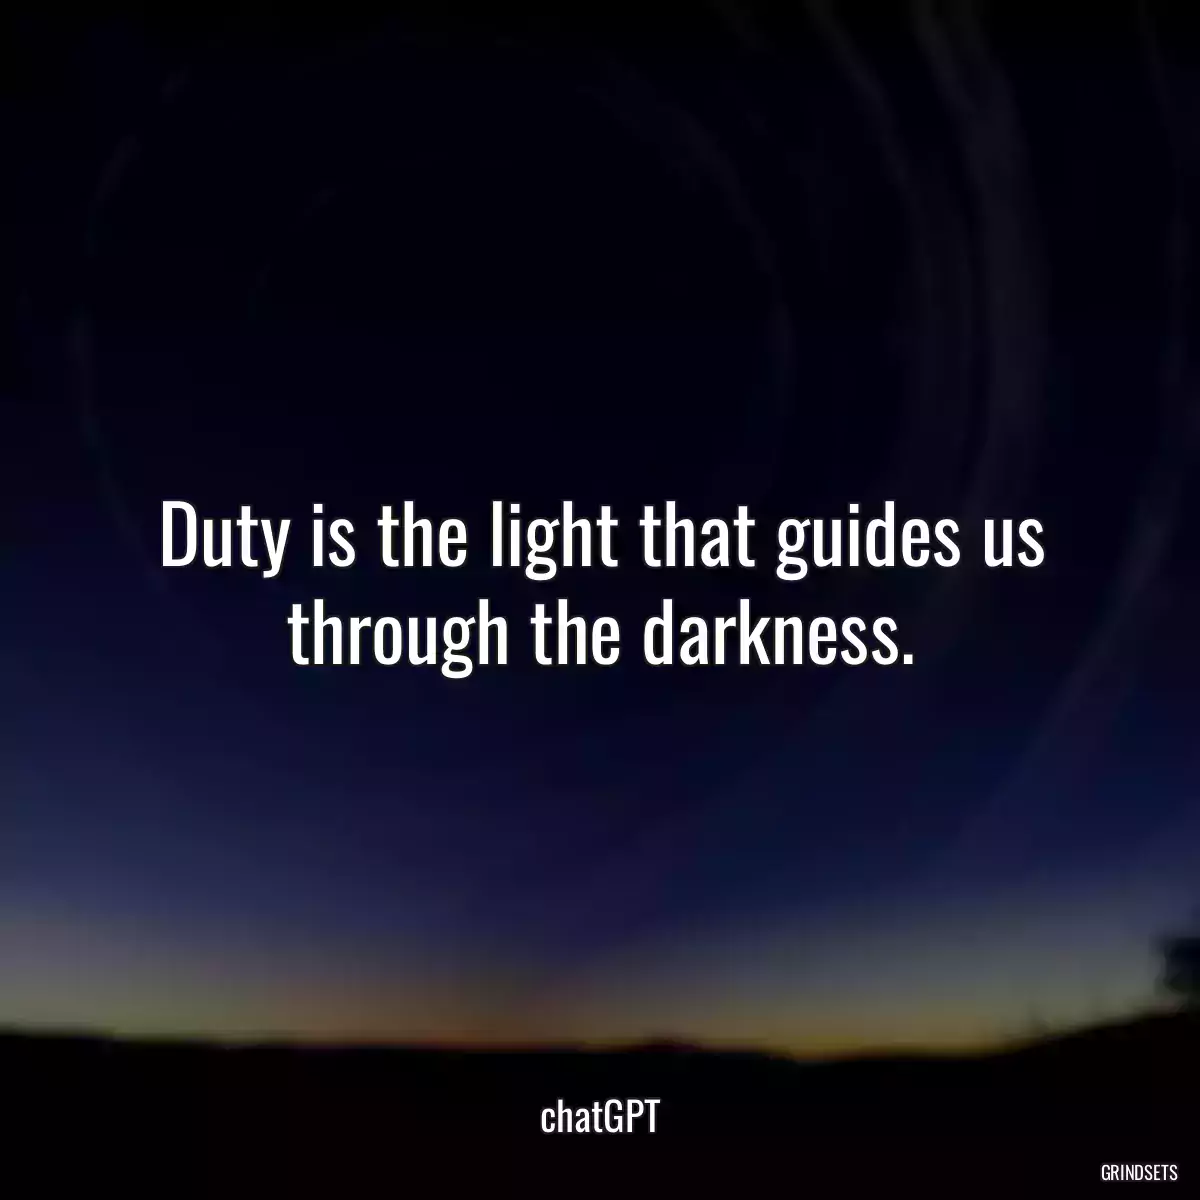 Duty is the light that guides us through the darkness.